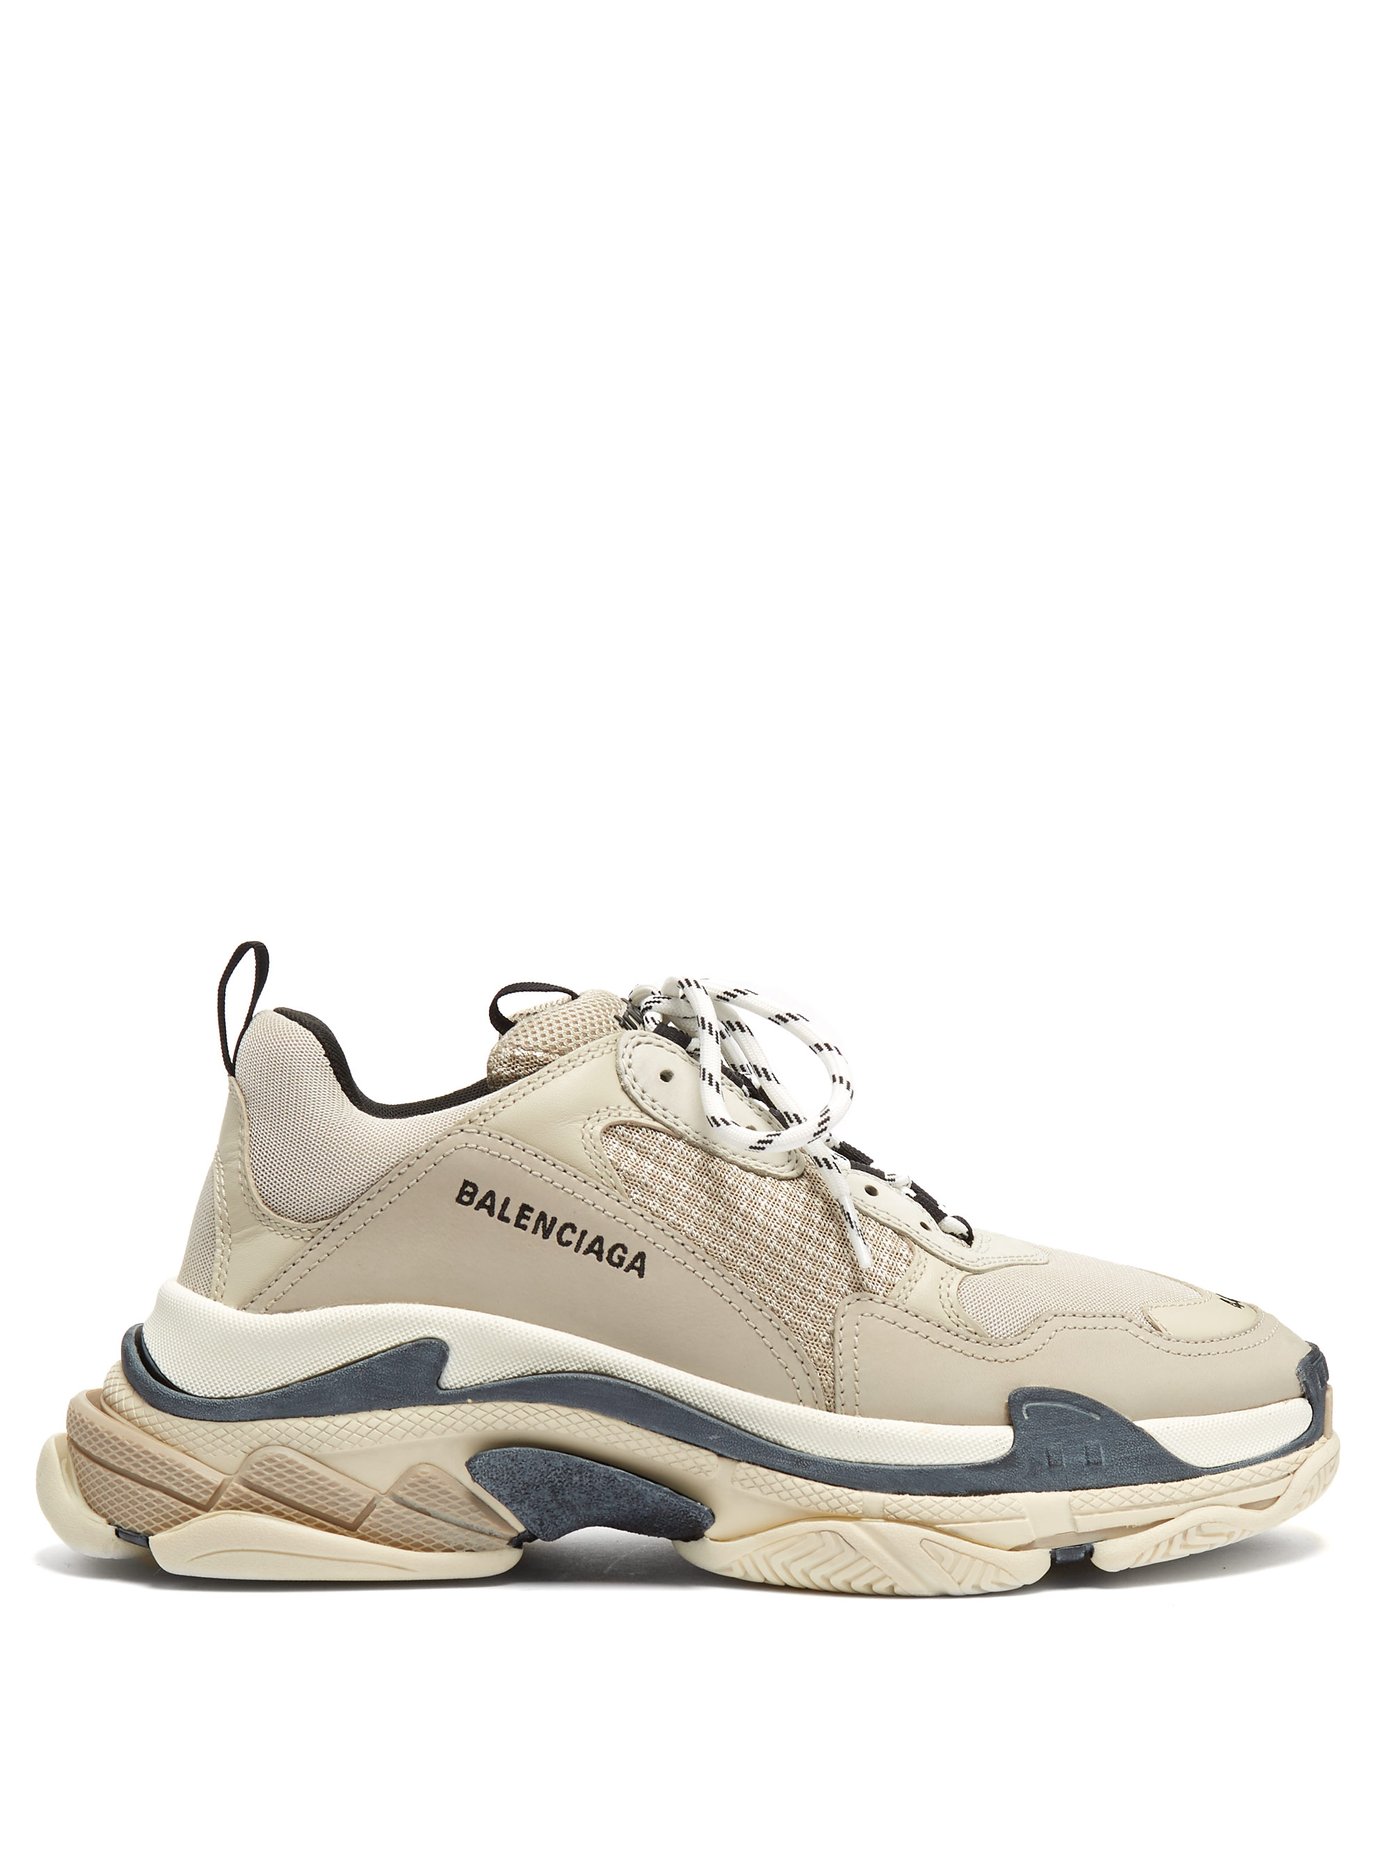 Review Balenciaga Triple S Clear sole Sneakers Grey